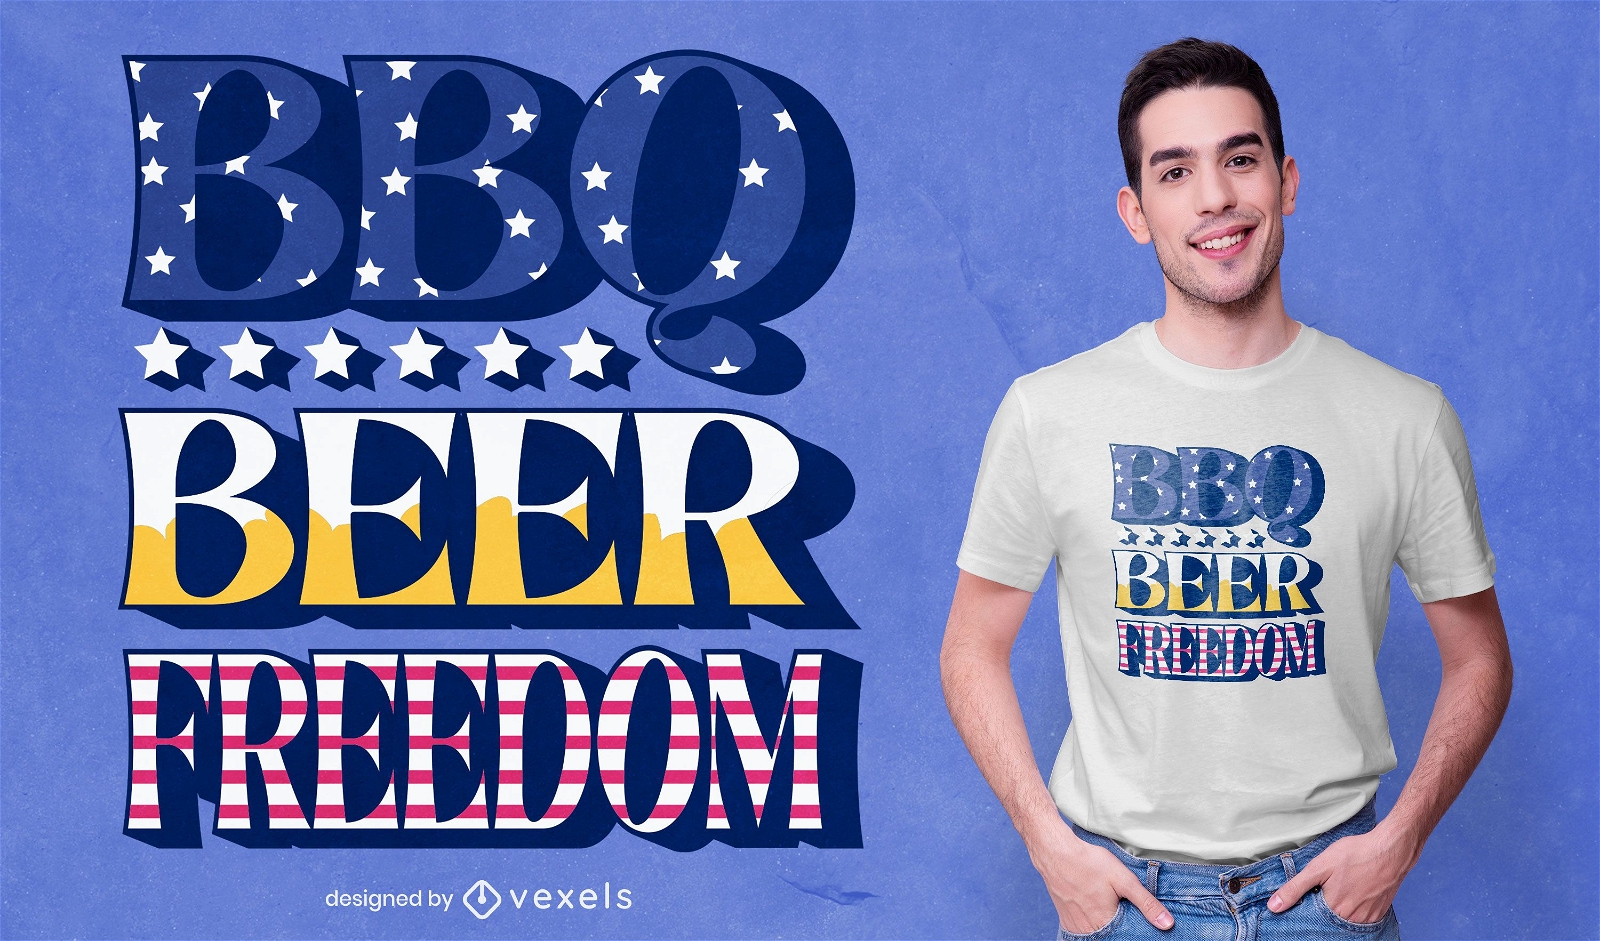 Bbq beer freedom quote t-shirt design